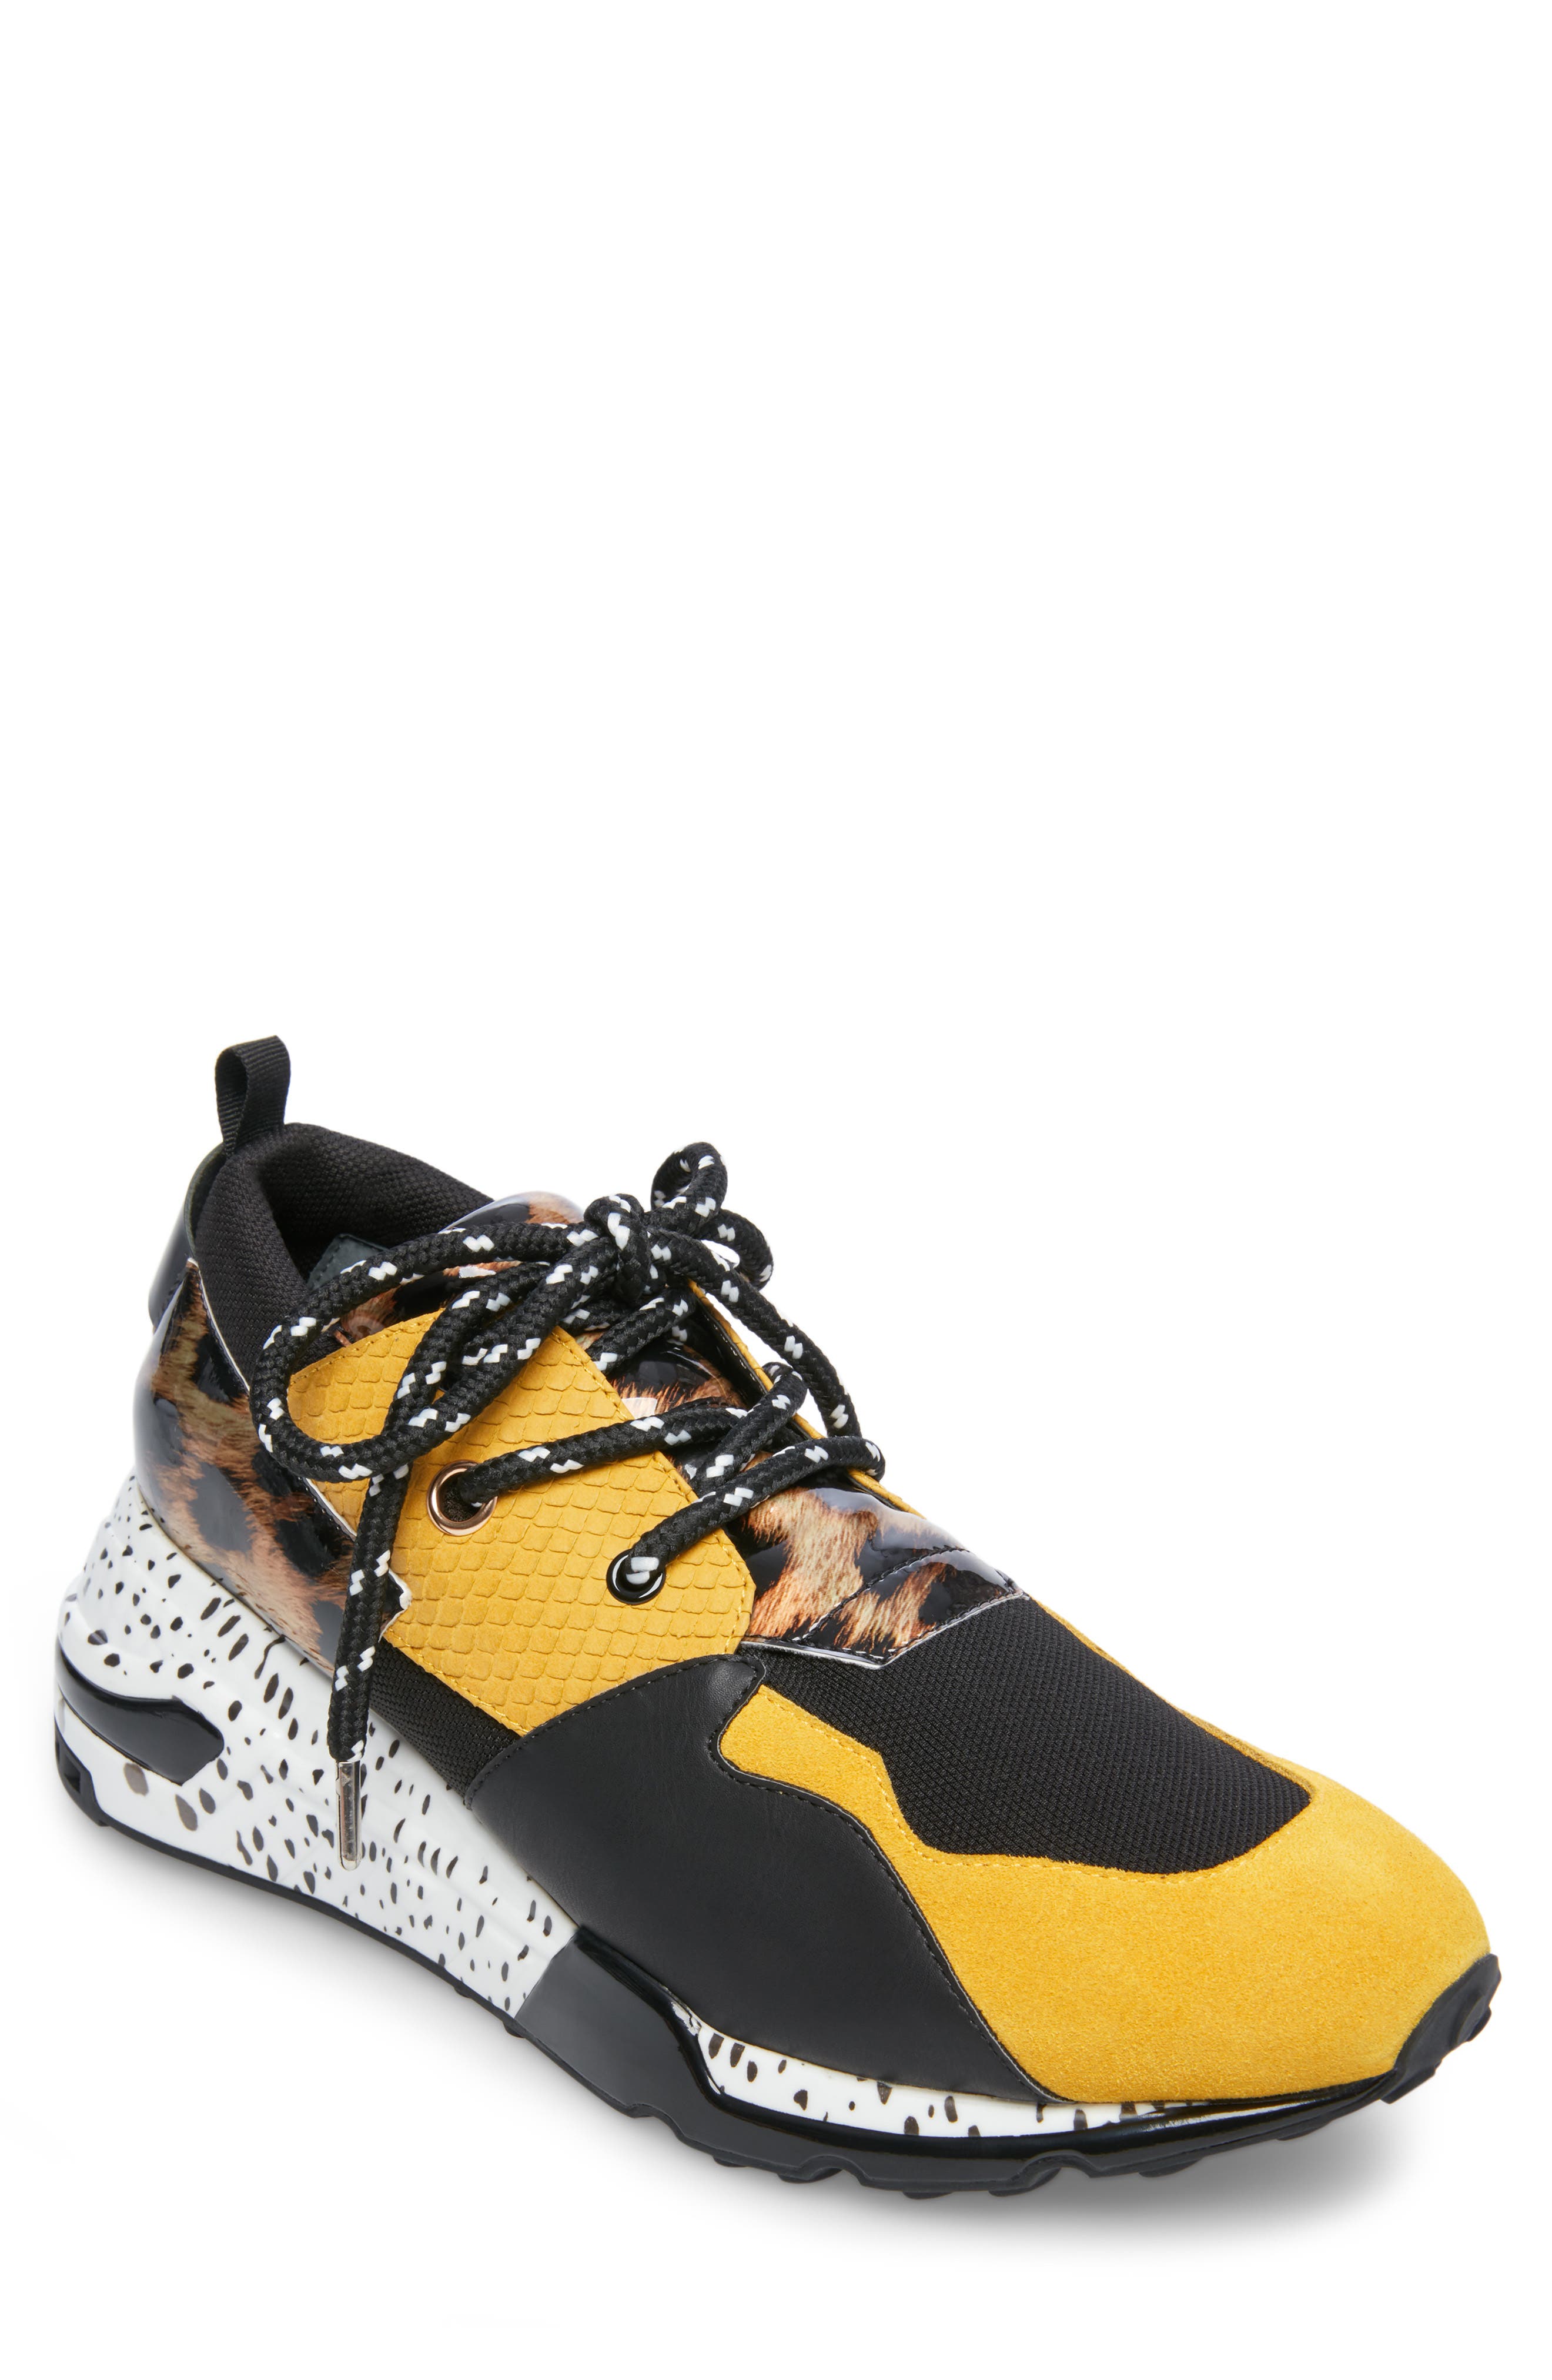 yellow steve madden shoes